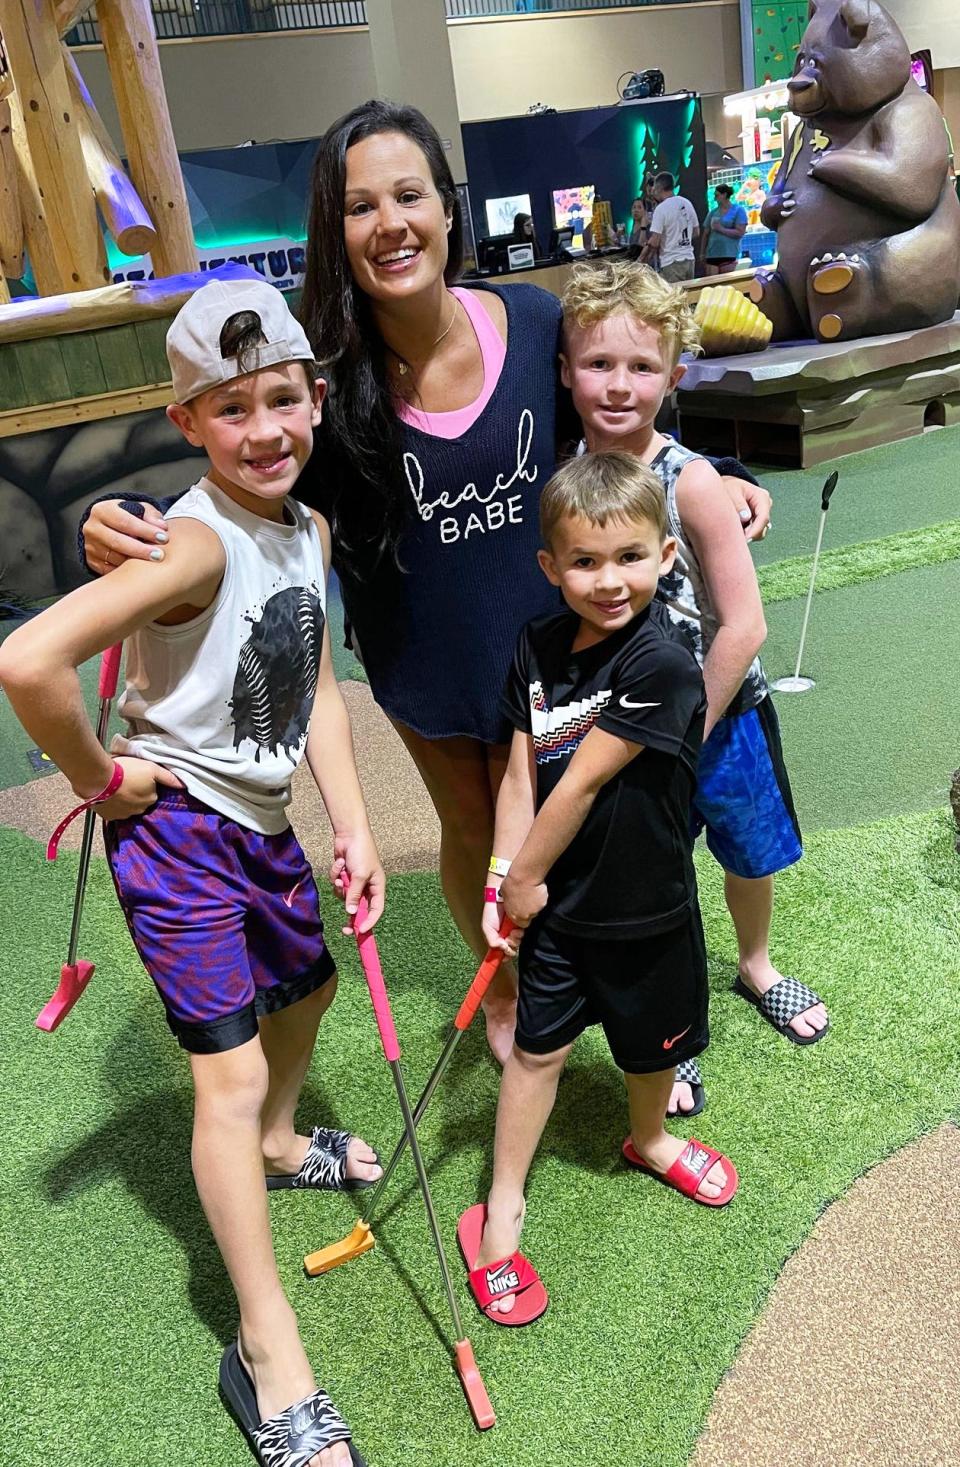 Raynham's Jenna Lyons with her three sons, Colton, 11, Connor, 9 and Finn, 6, on Monday, Aug. 1 during a family trip to the Great Wolf Lodge. Lyons was diagnosed with breast cancer in 2019 and has been in treatment since, but she's showing support for other women facing similiar fights by collecting comfort items for self-care bags.  